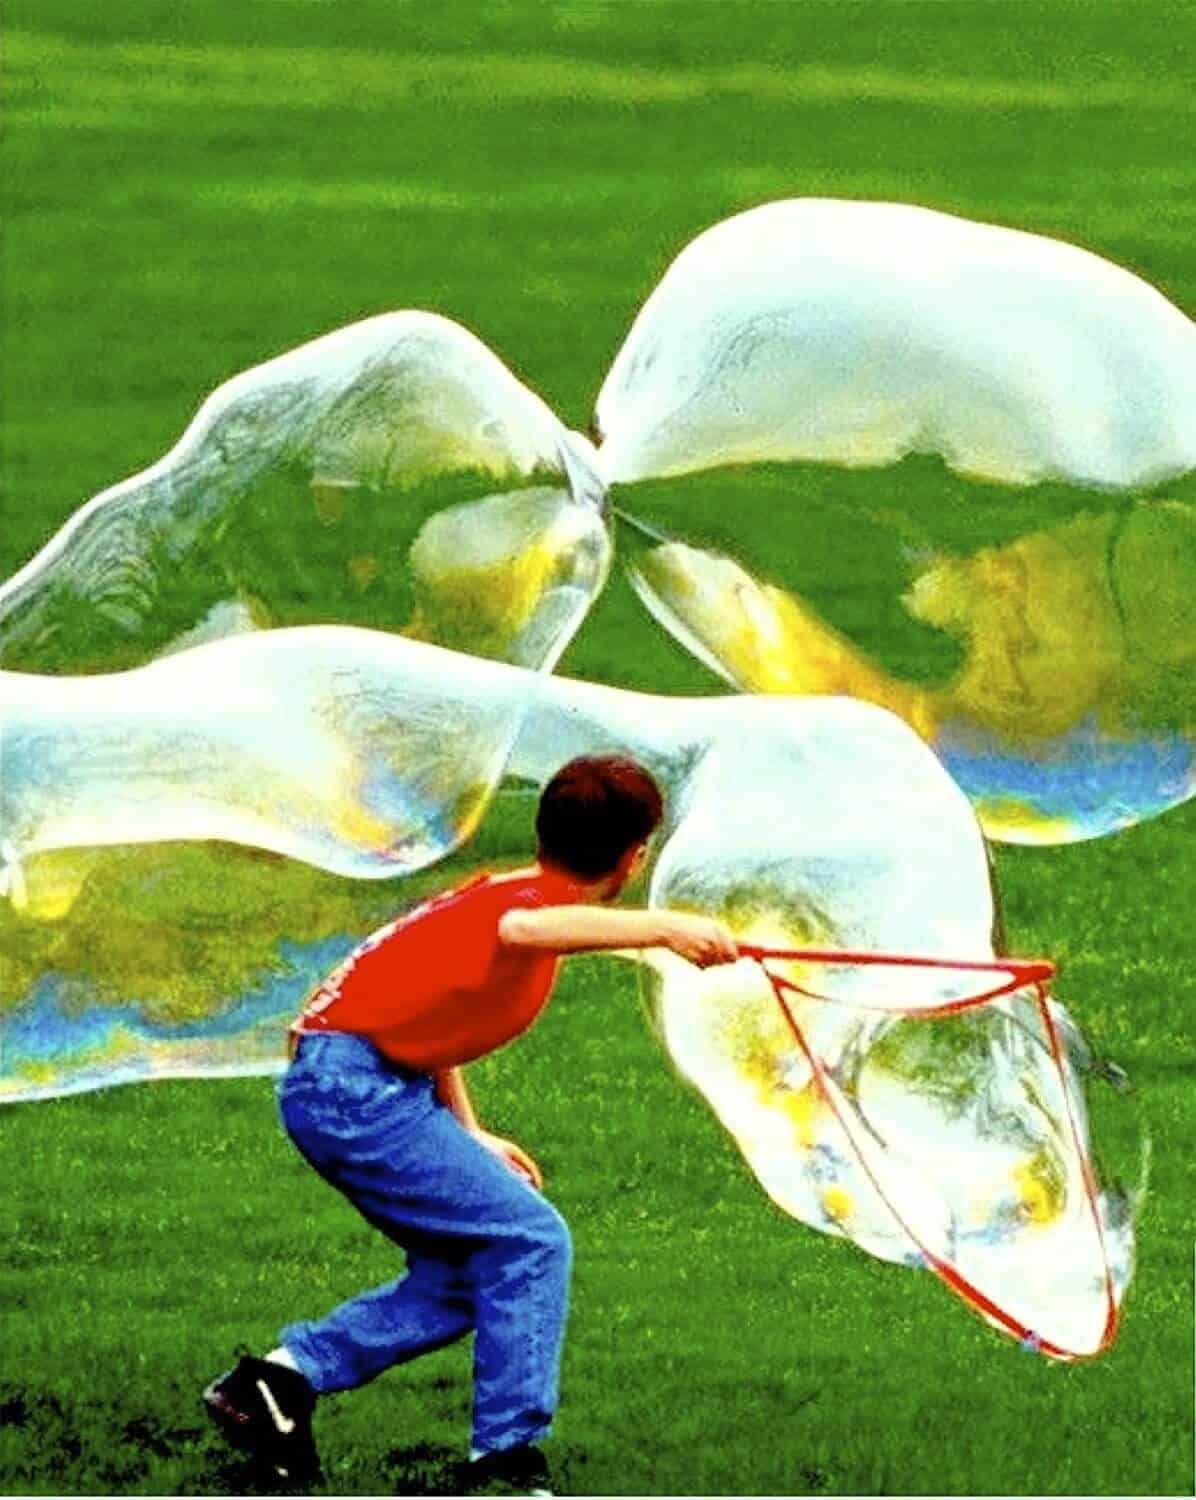 Giant Bubbles Wand